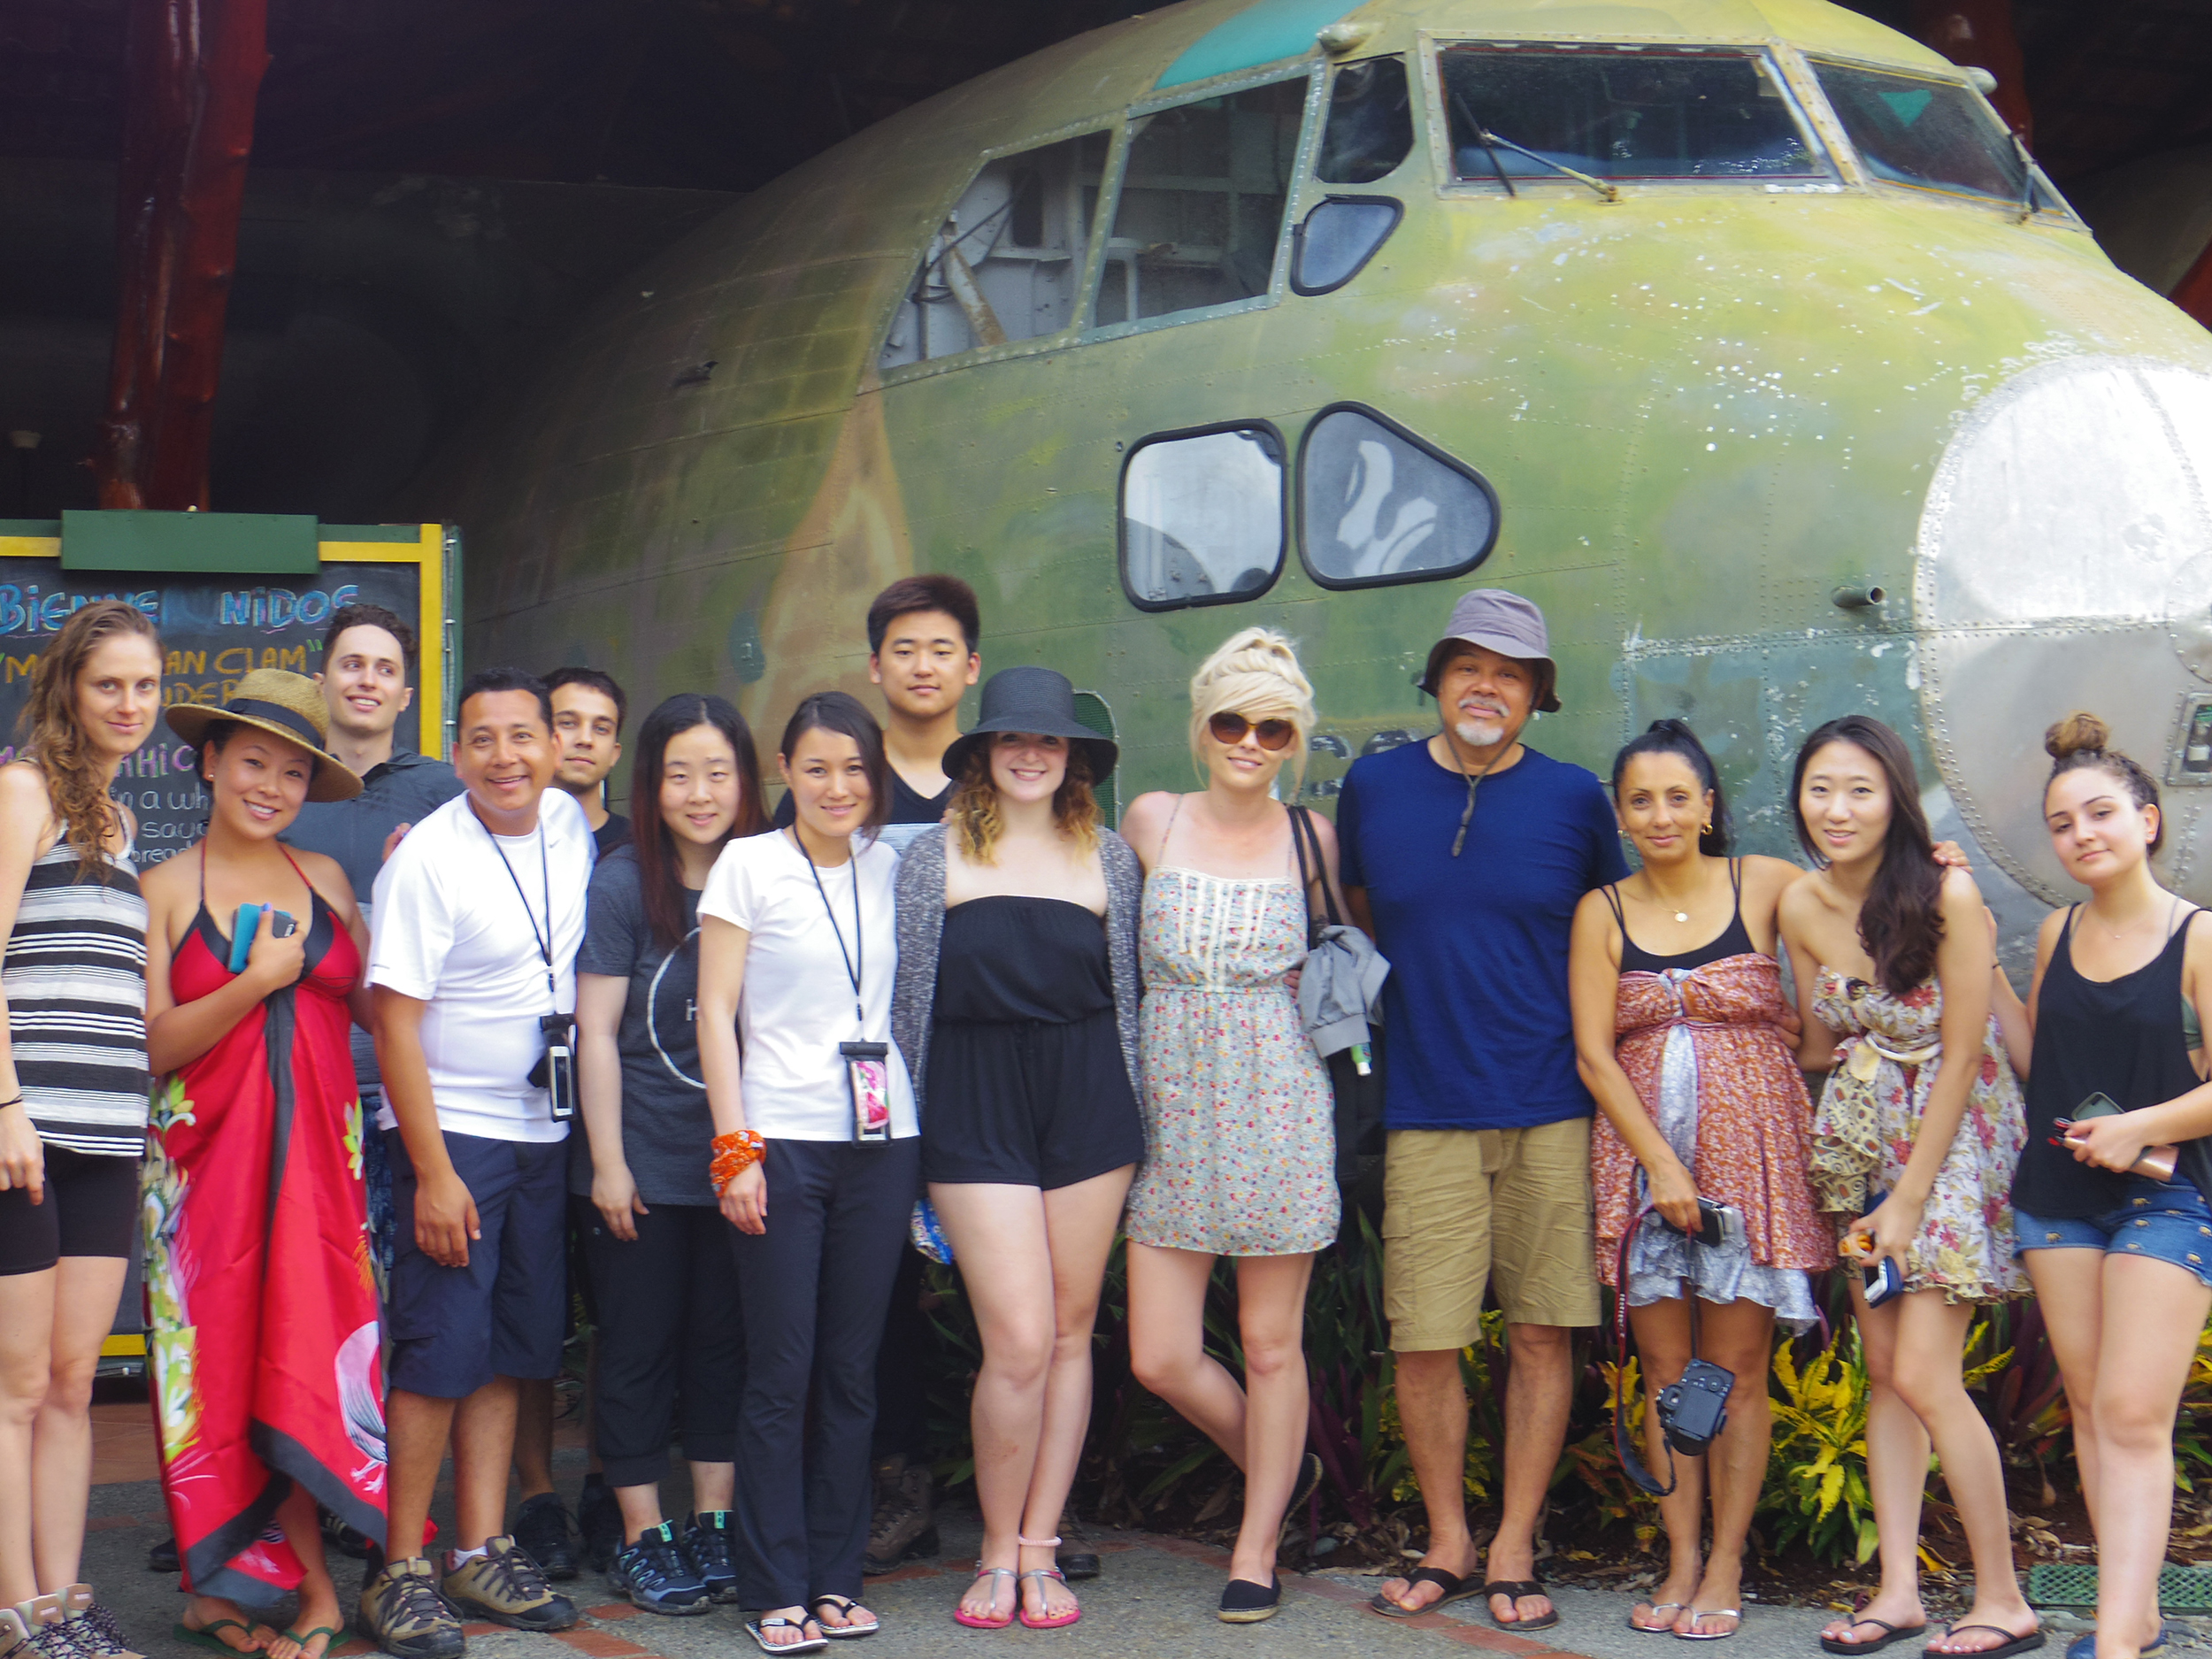 004-Costa-Rica-ArtCenter-Study-Away-trip-group-in-front-of-airplane.jpg